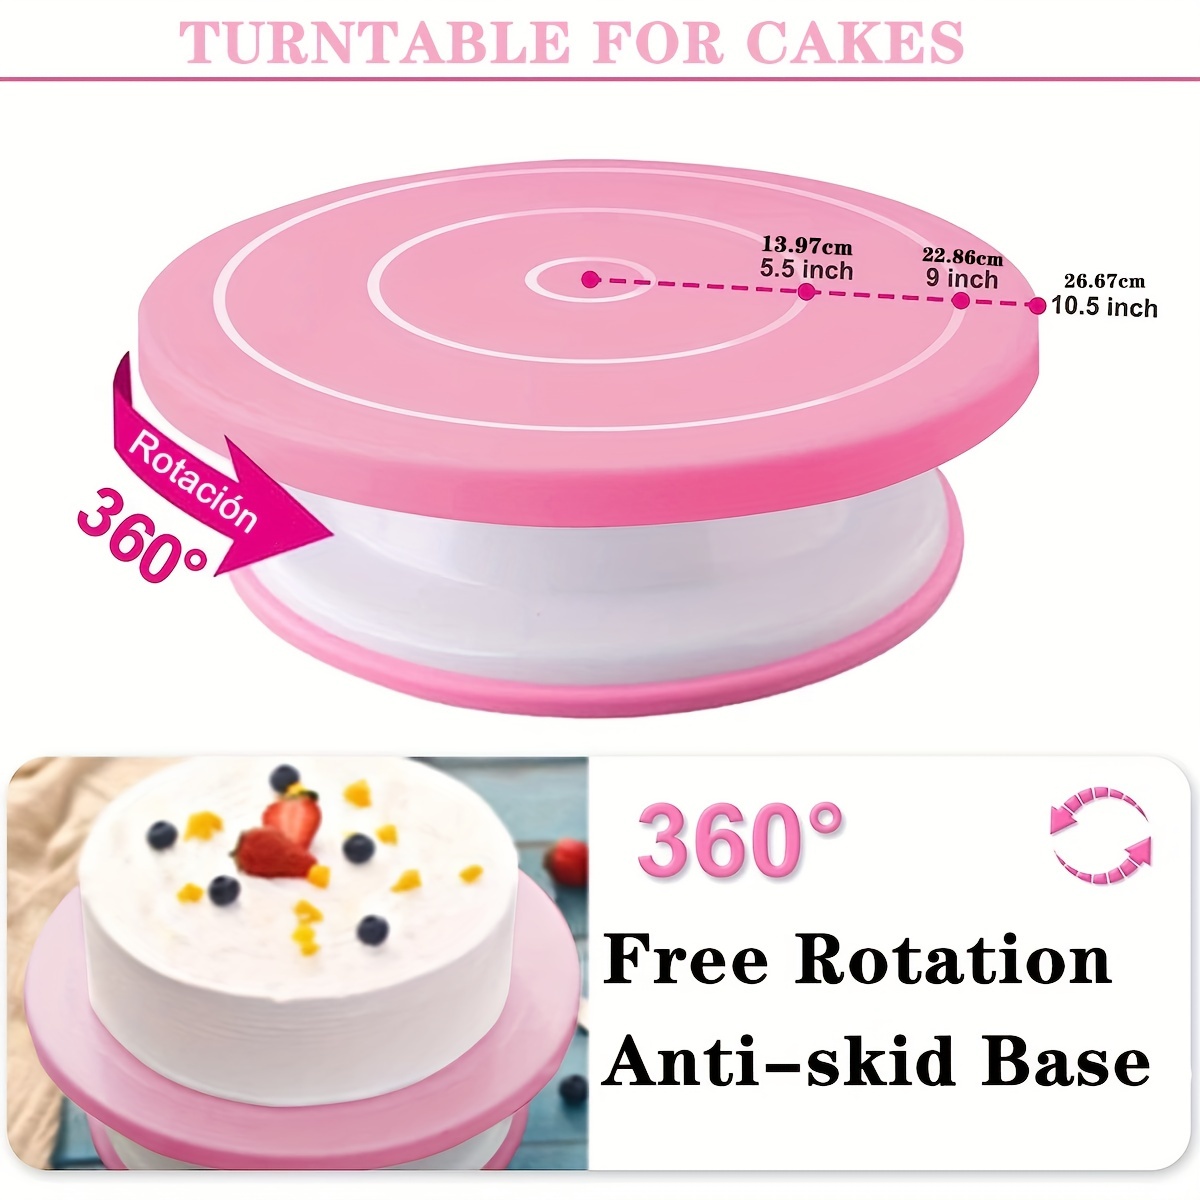 28cm Plastic Rotating Cake Decorating Stand Cake Icing Turntable